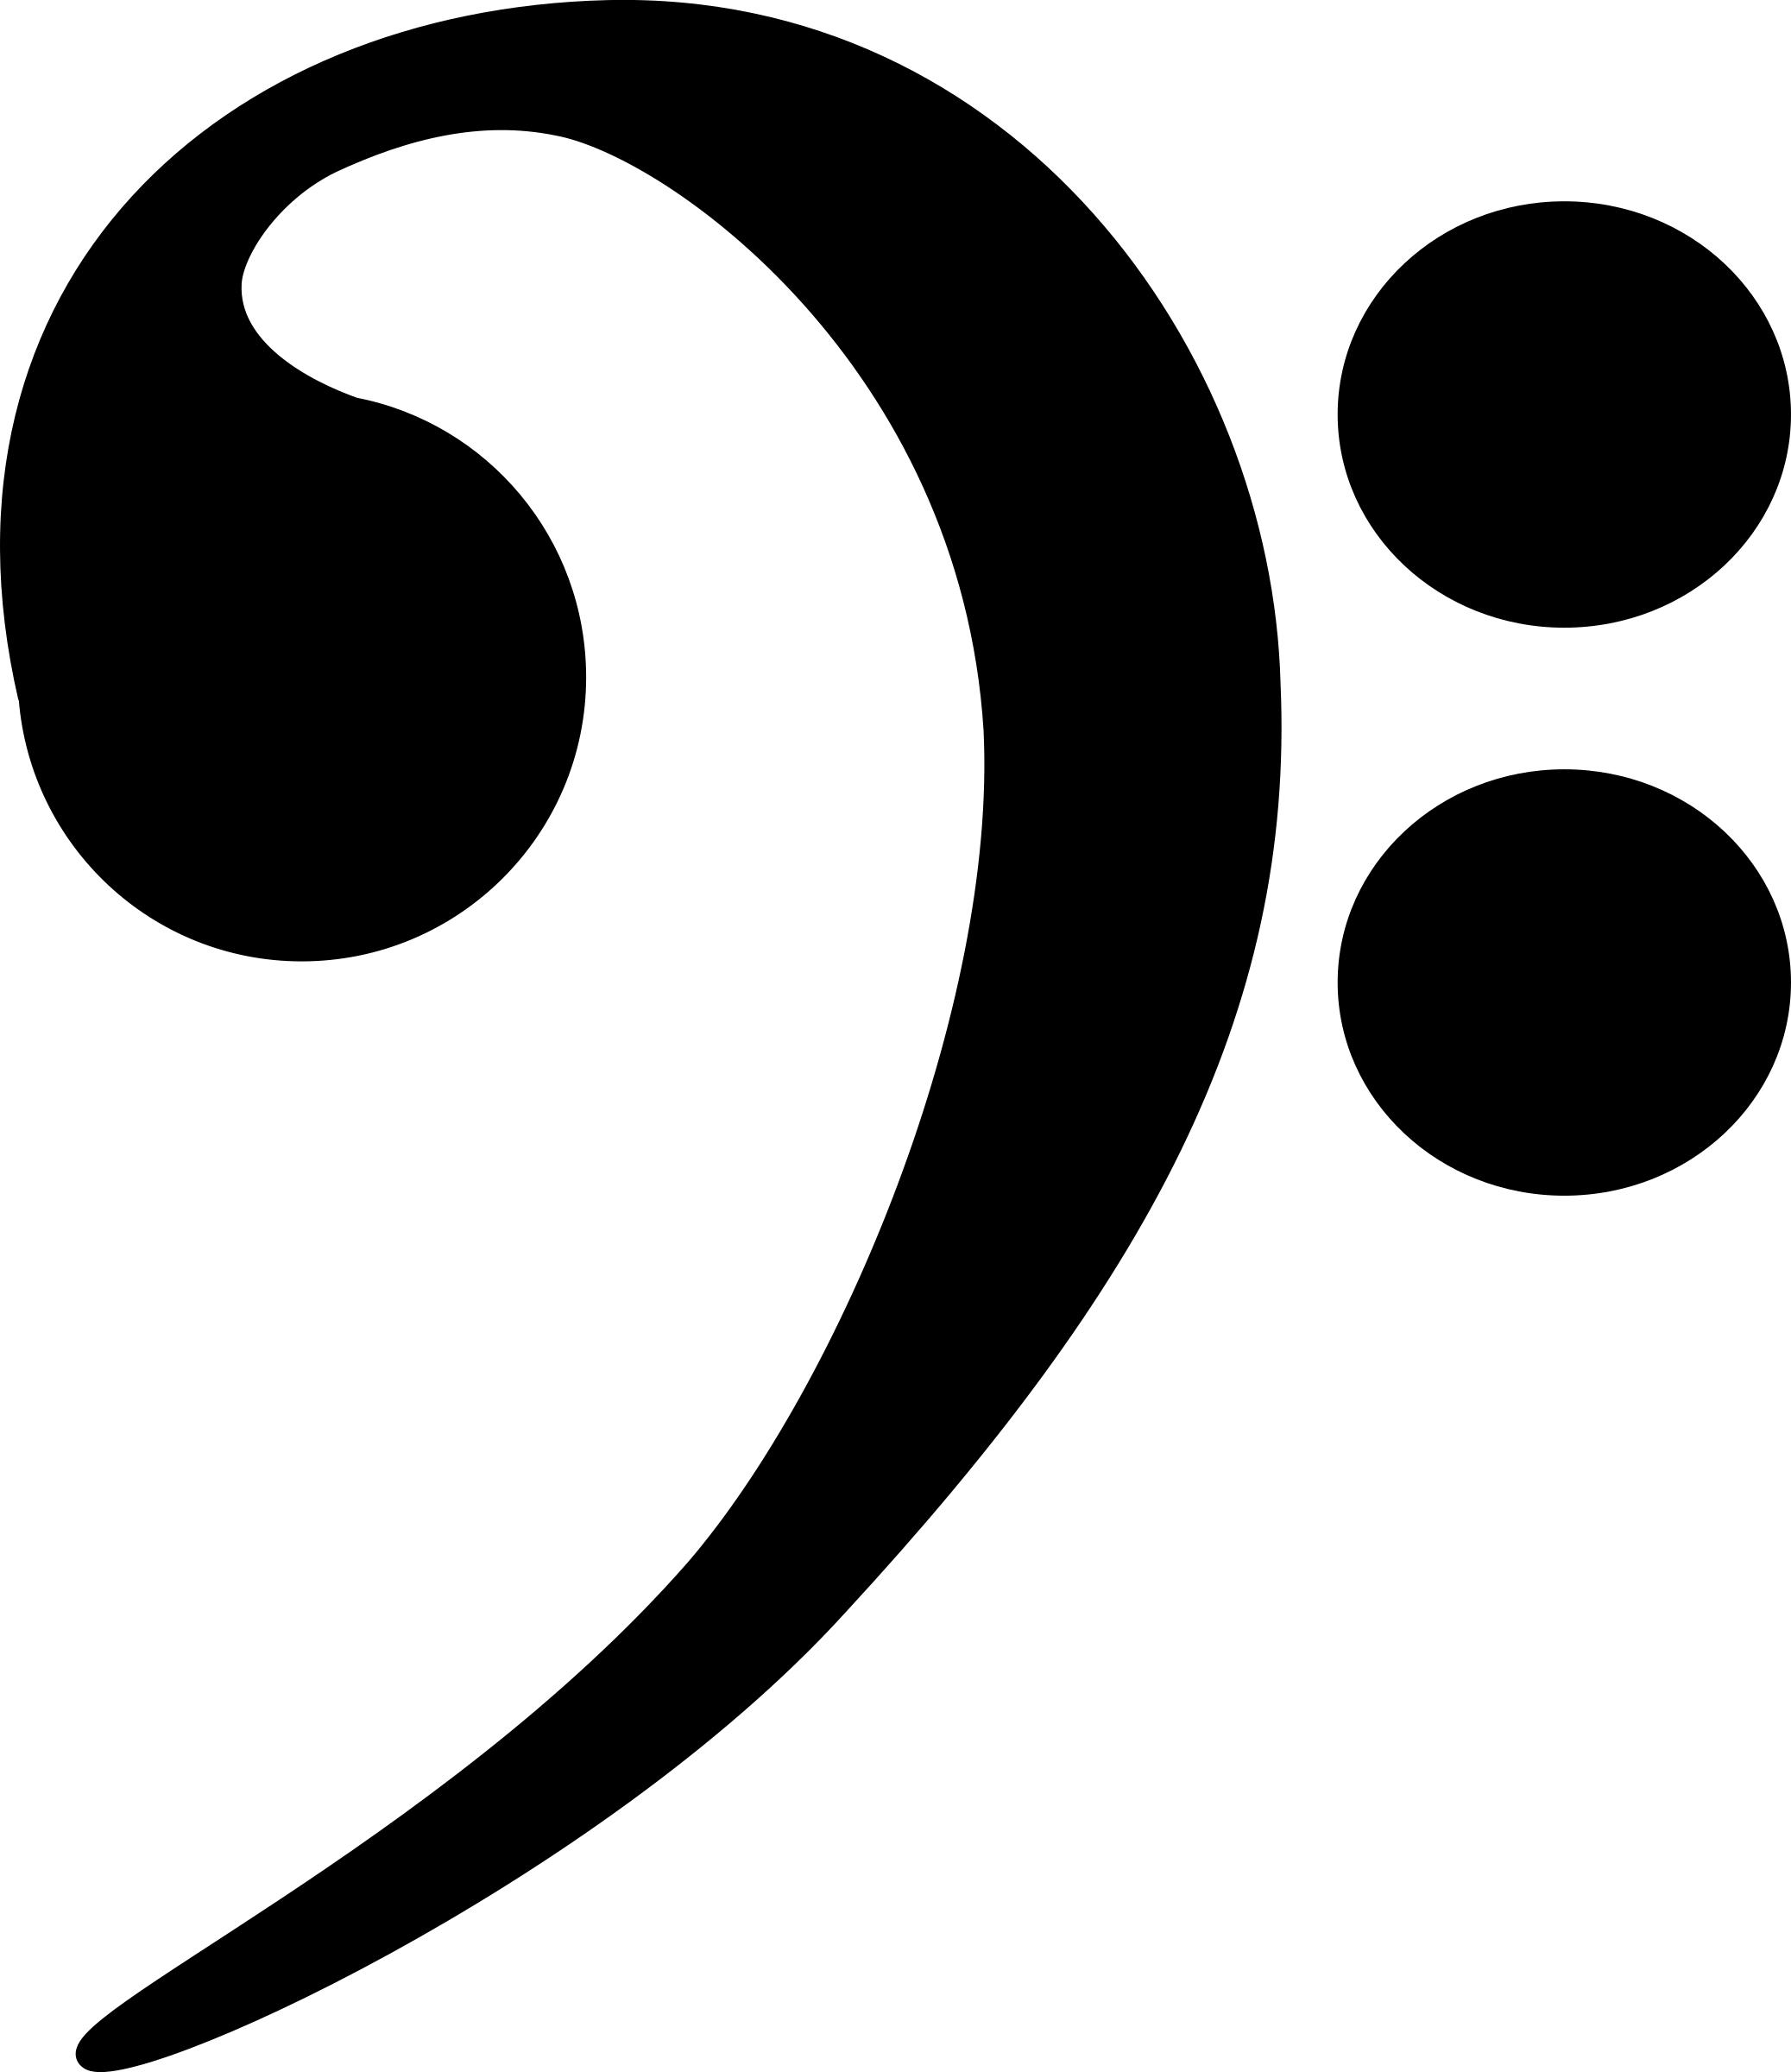 Black Bass Clef png